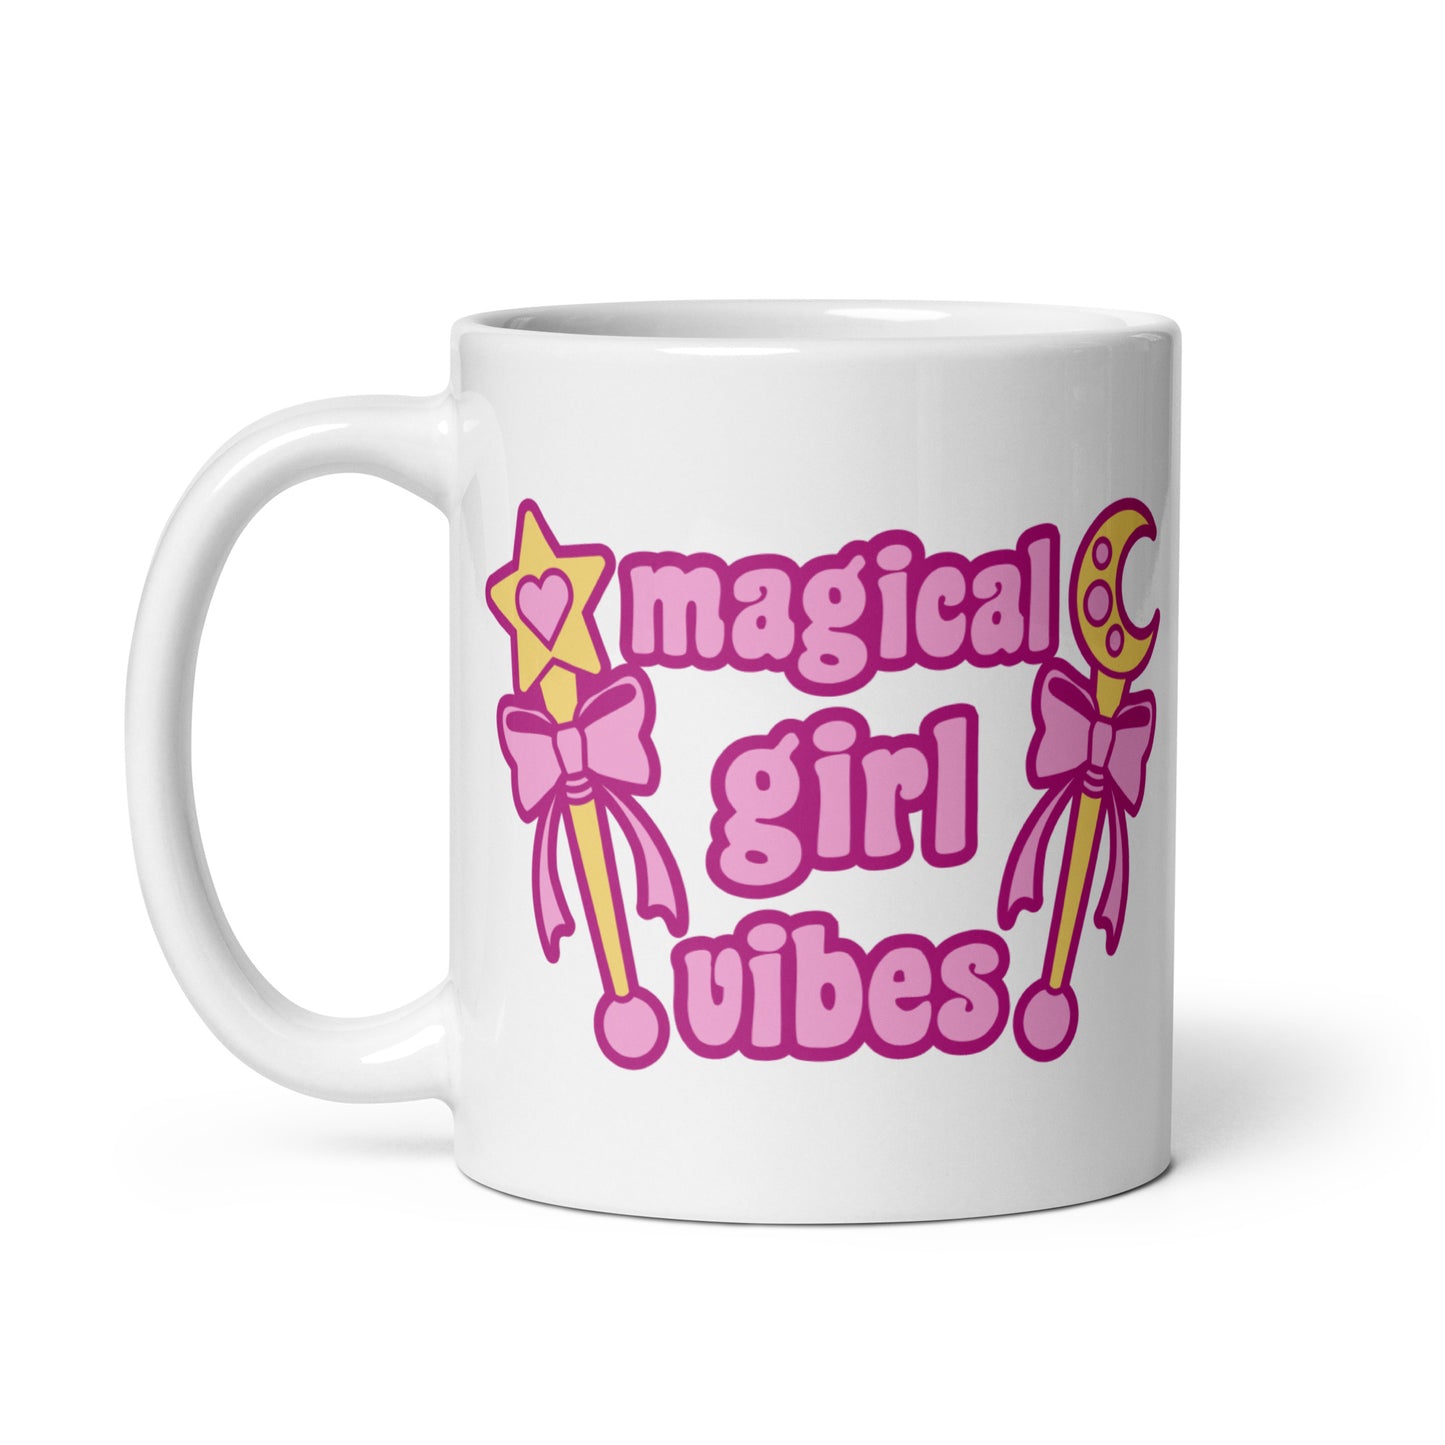 An 11 oz white ceramic mug with the handle to the left featuring two gold wands with pink bows and pink text reading "Magical girl vibes"